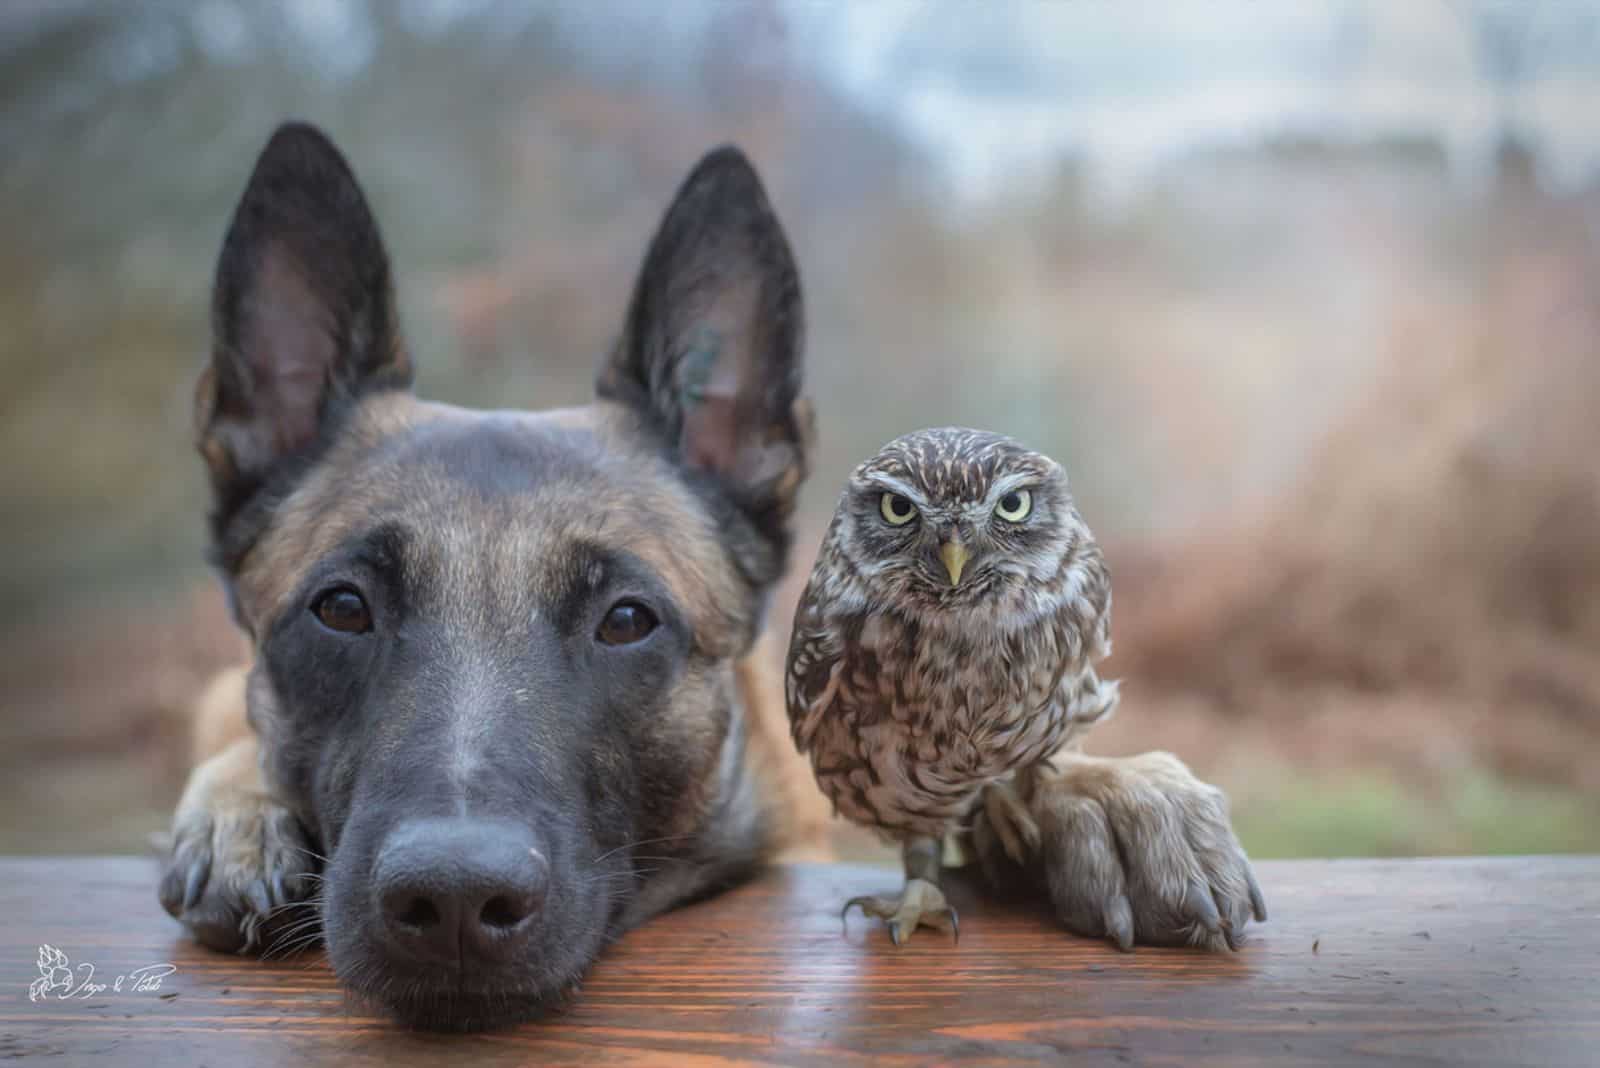 belgian malinois and tiny owl on wooden table